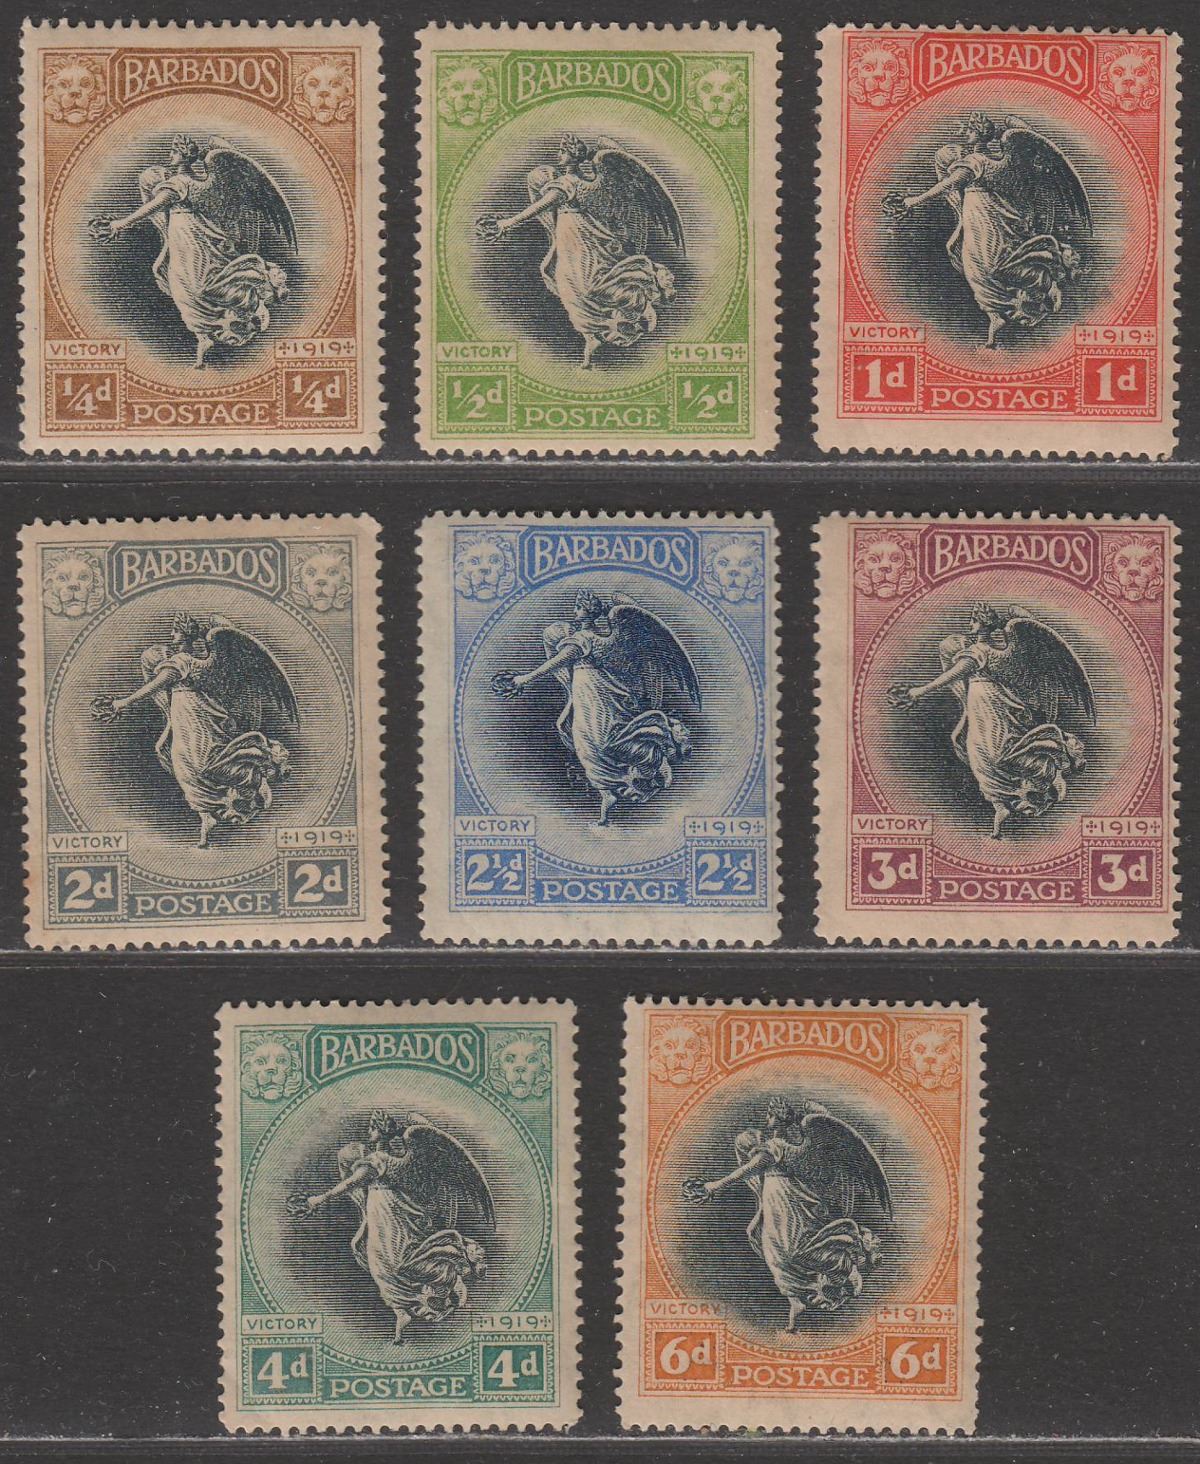 Barbados 1920-21 KGV Victory Set to 6d Mint SG201-208 heavily toned